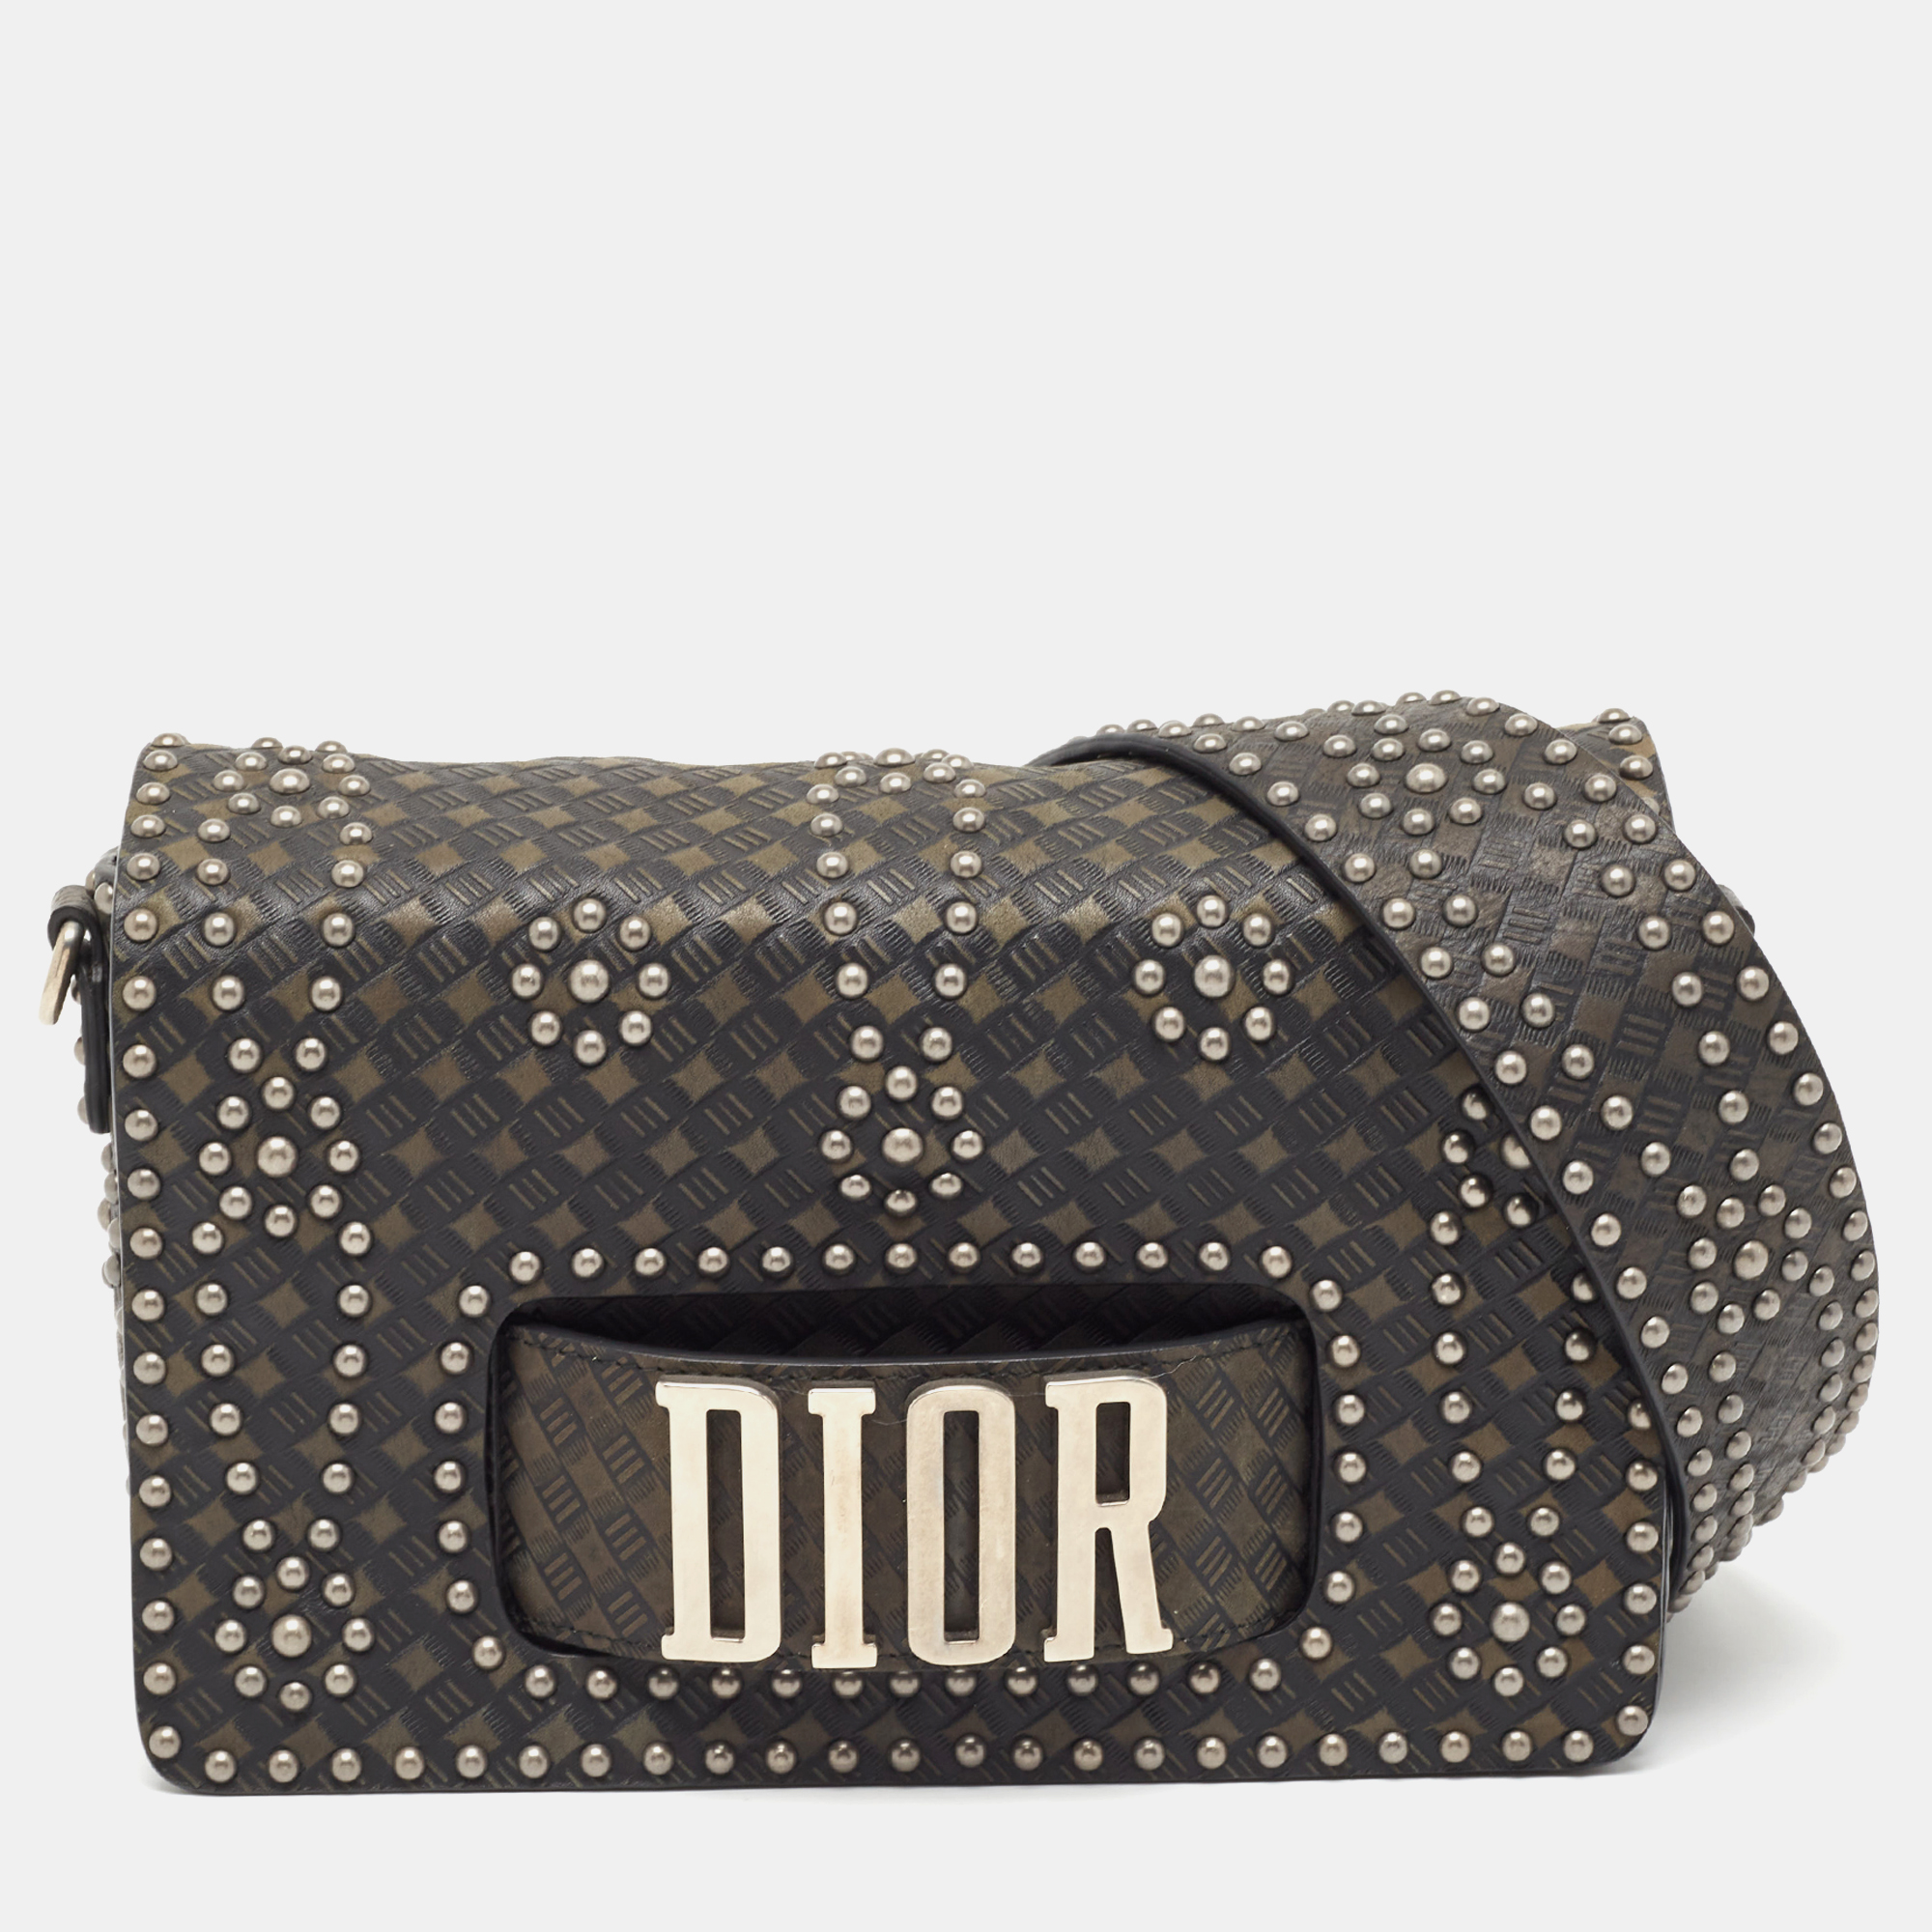 Dior never ceases to startle us with their refreshing collections of amazing bags. This Dio(r)evolution bag is yet another thoughtful design from the house of Dior. Crafted with leather in a flap style it profiles studs all over and a silver tone DIOR on the slot handclasp an interesting feature that lets you carry the bag effortlessly in hand.